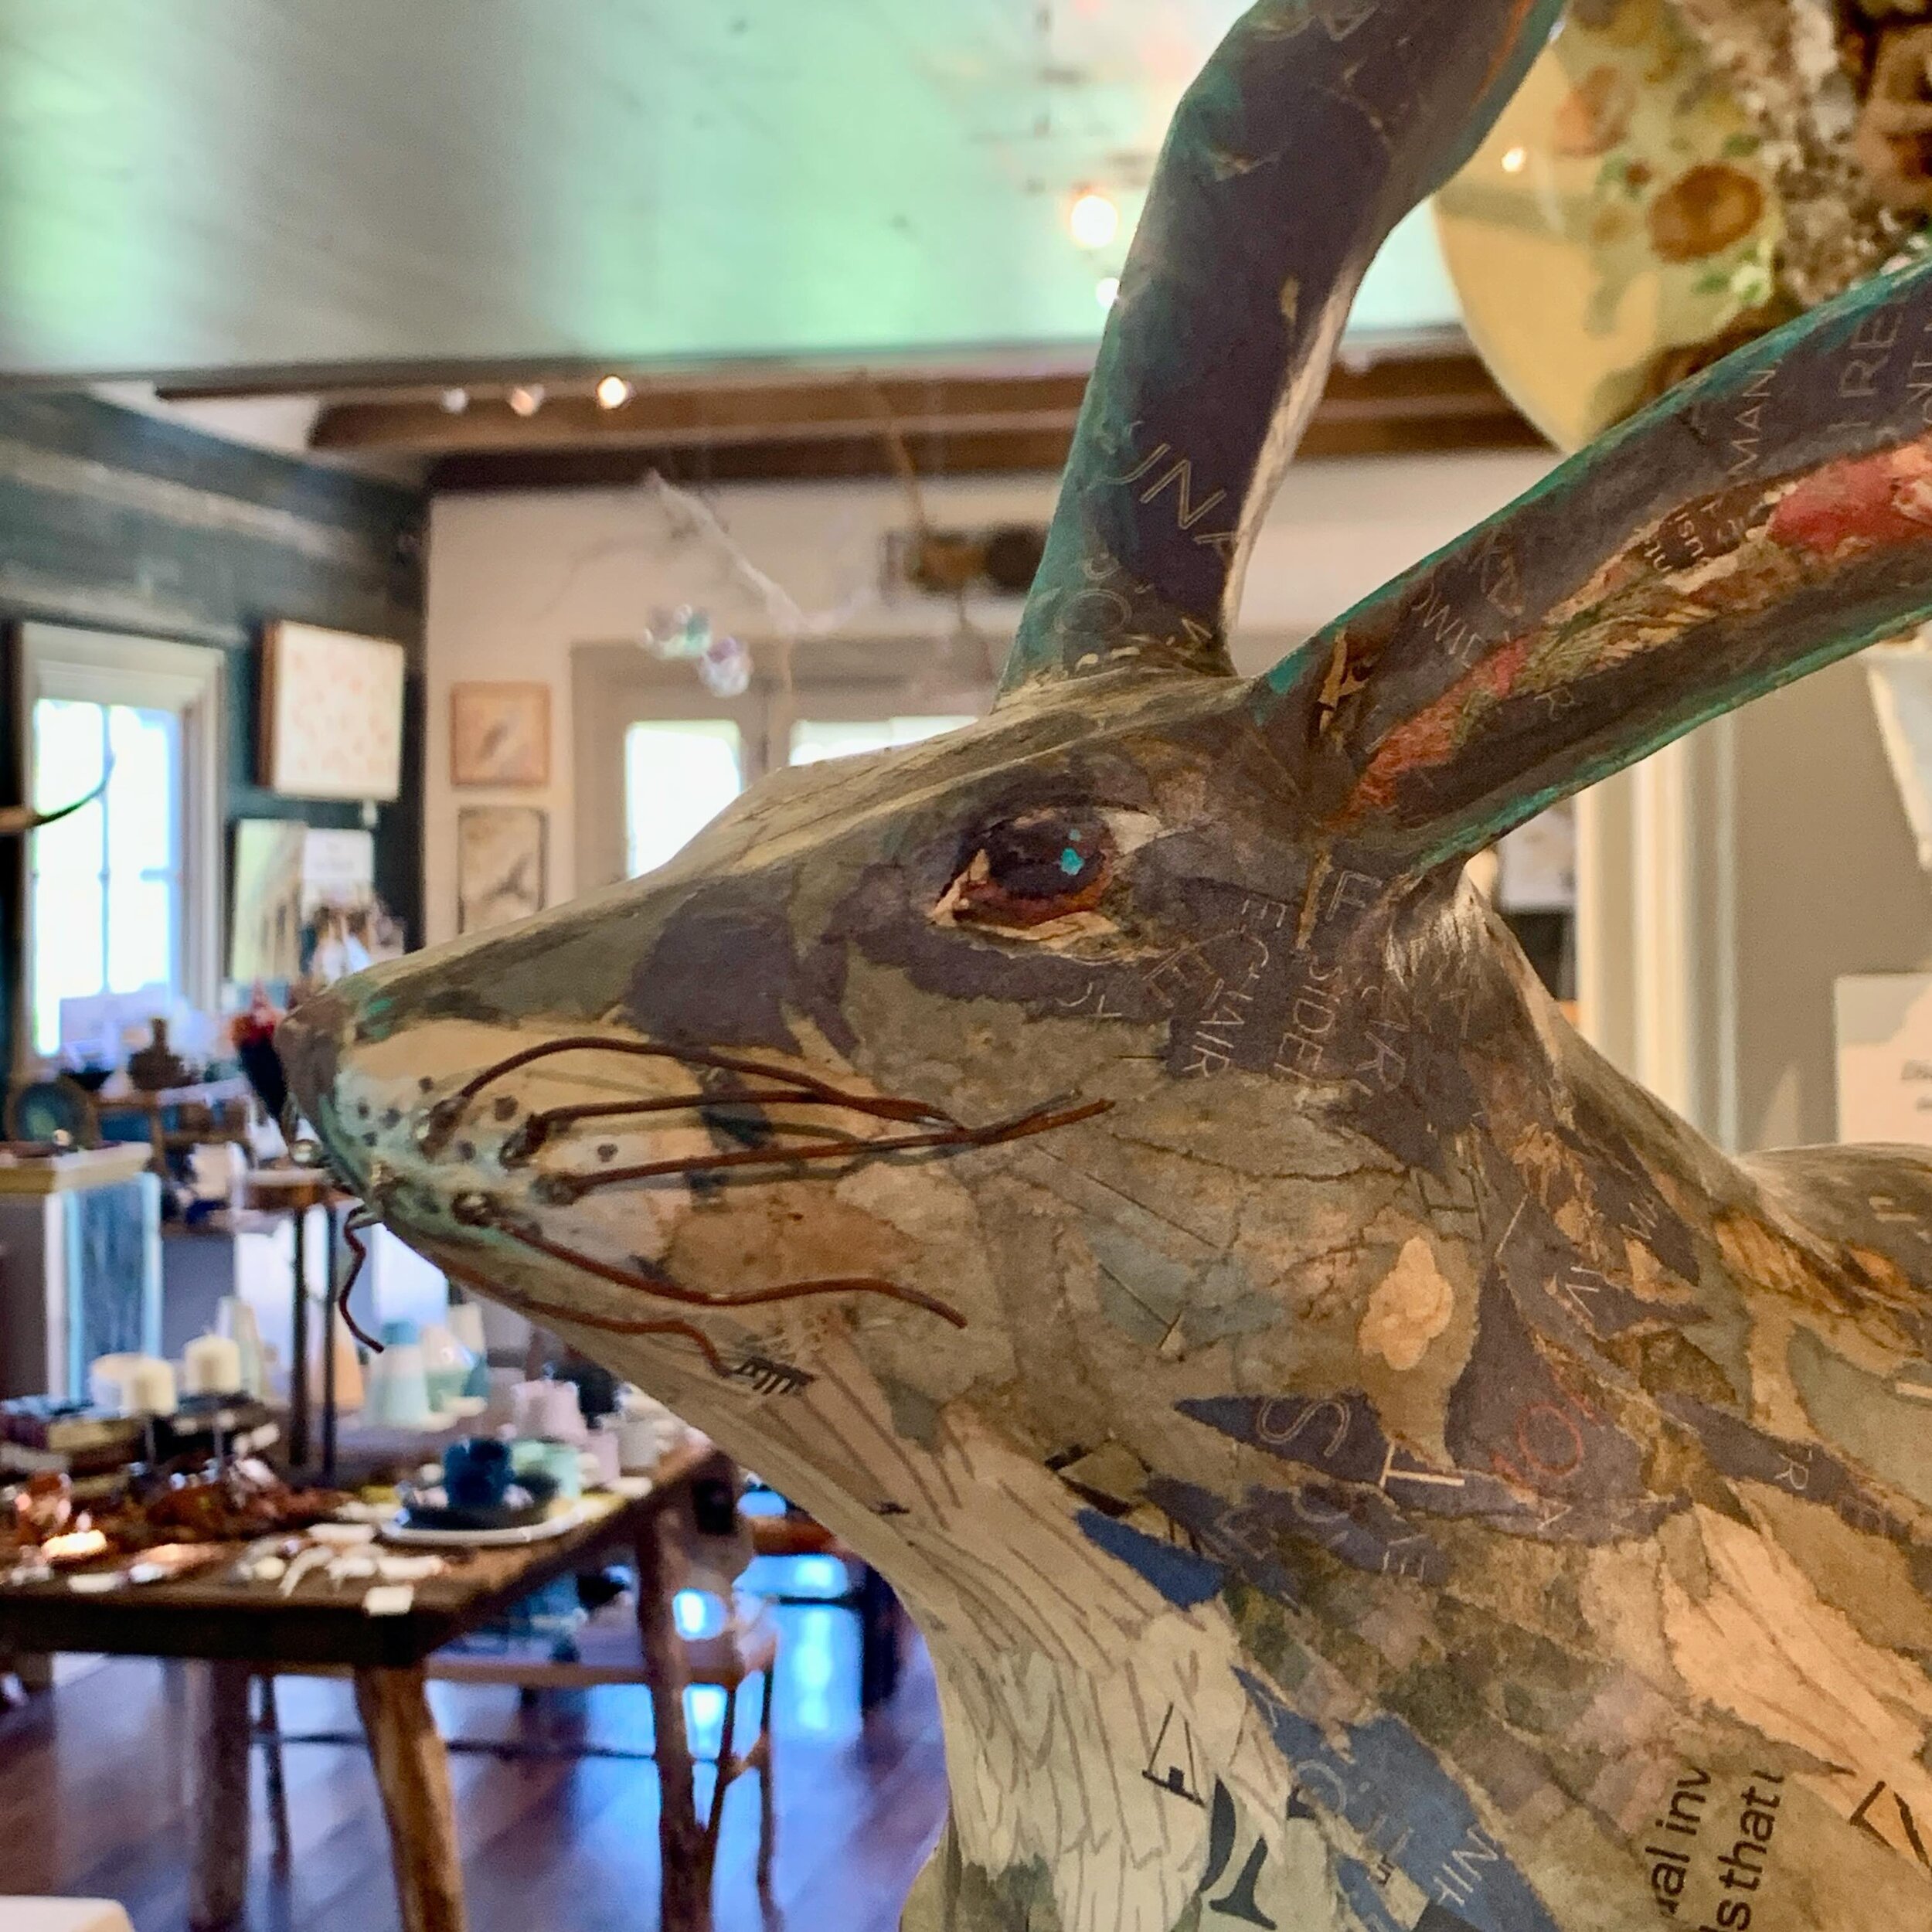 We are open today until 5 pm&hellip;.closed tomorrow for Easter Sunday. See you next week!!

&ldquo;It&rsquo;s the Journey, Not the Race&rdquo;
Paper sculpture by Valerie Edwards
#visitfranklintn #finecraft #craftgallery #leipersfork